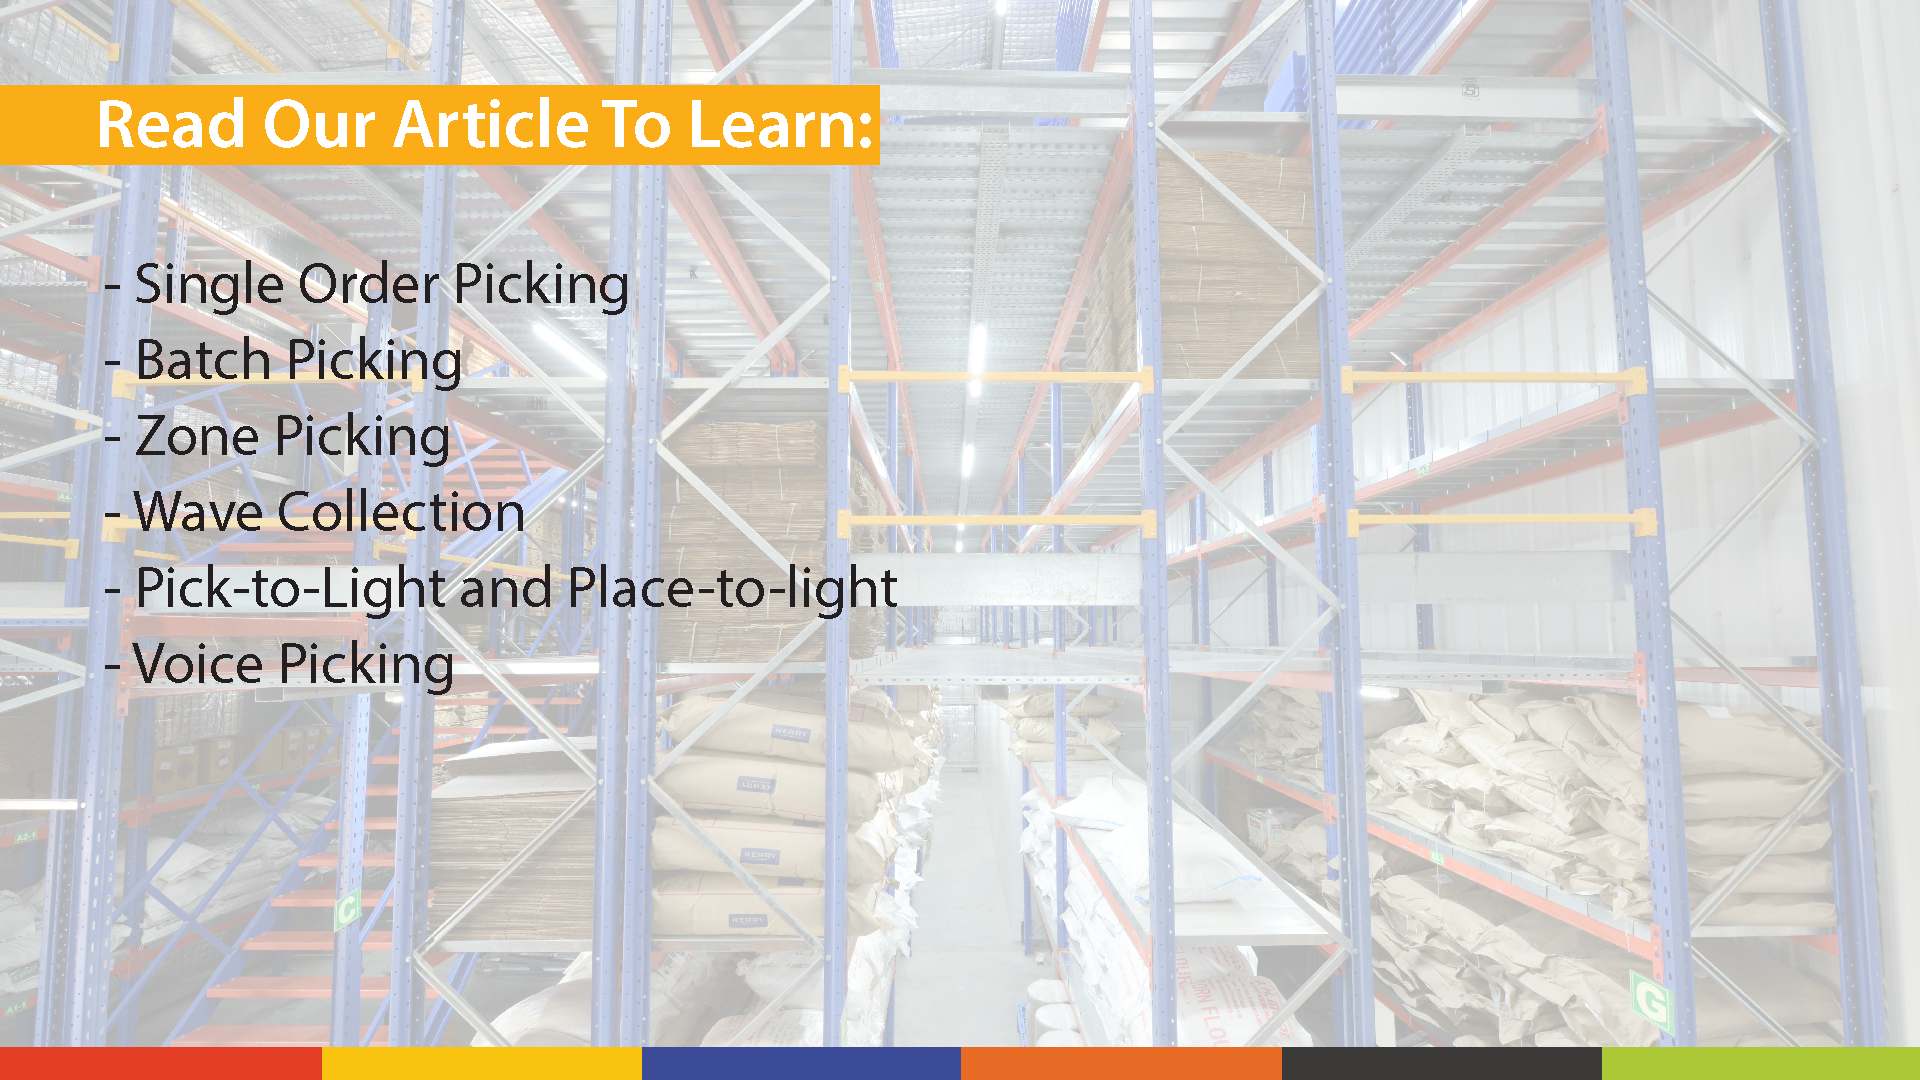 Smart Investments for Smart Warehousing